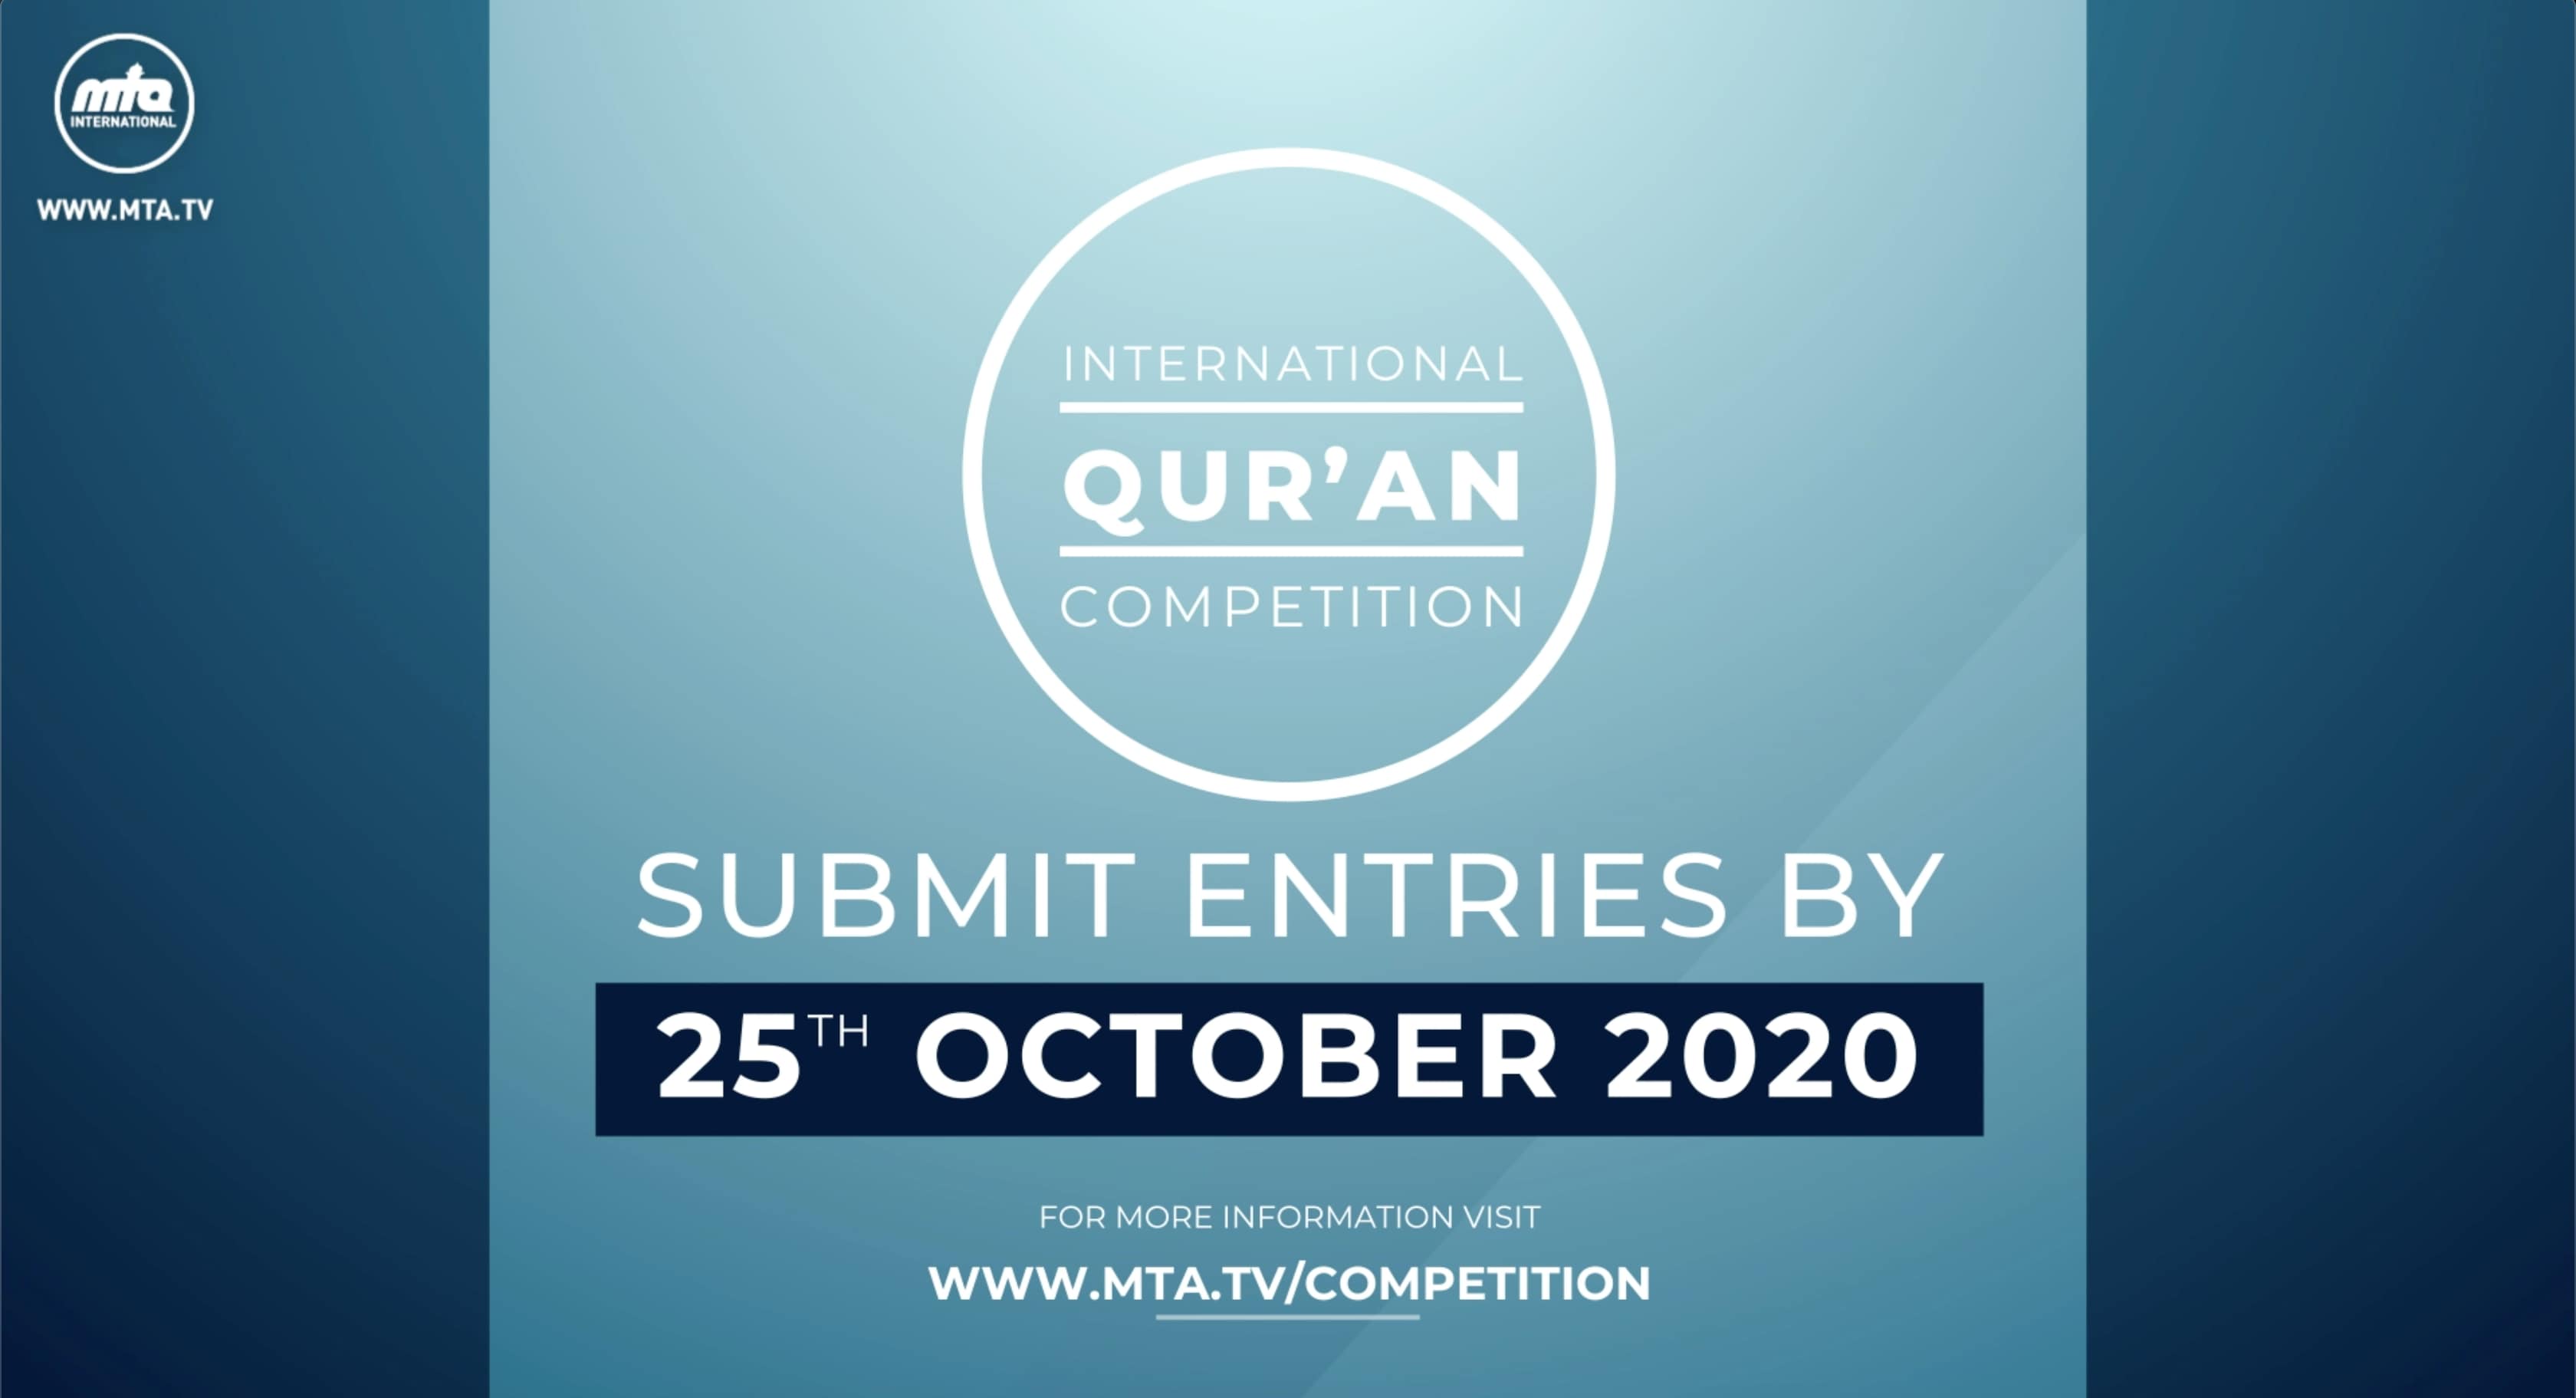 The International Qur'an Competition Submit Your Entries!! MTA